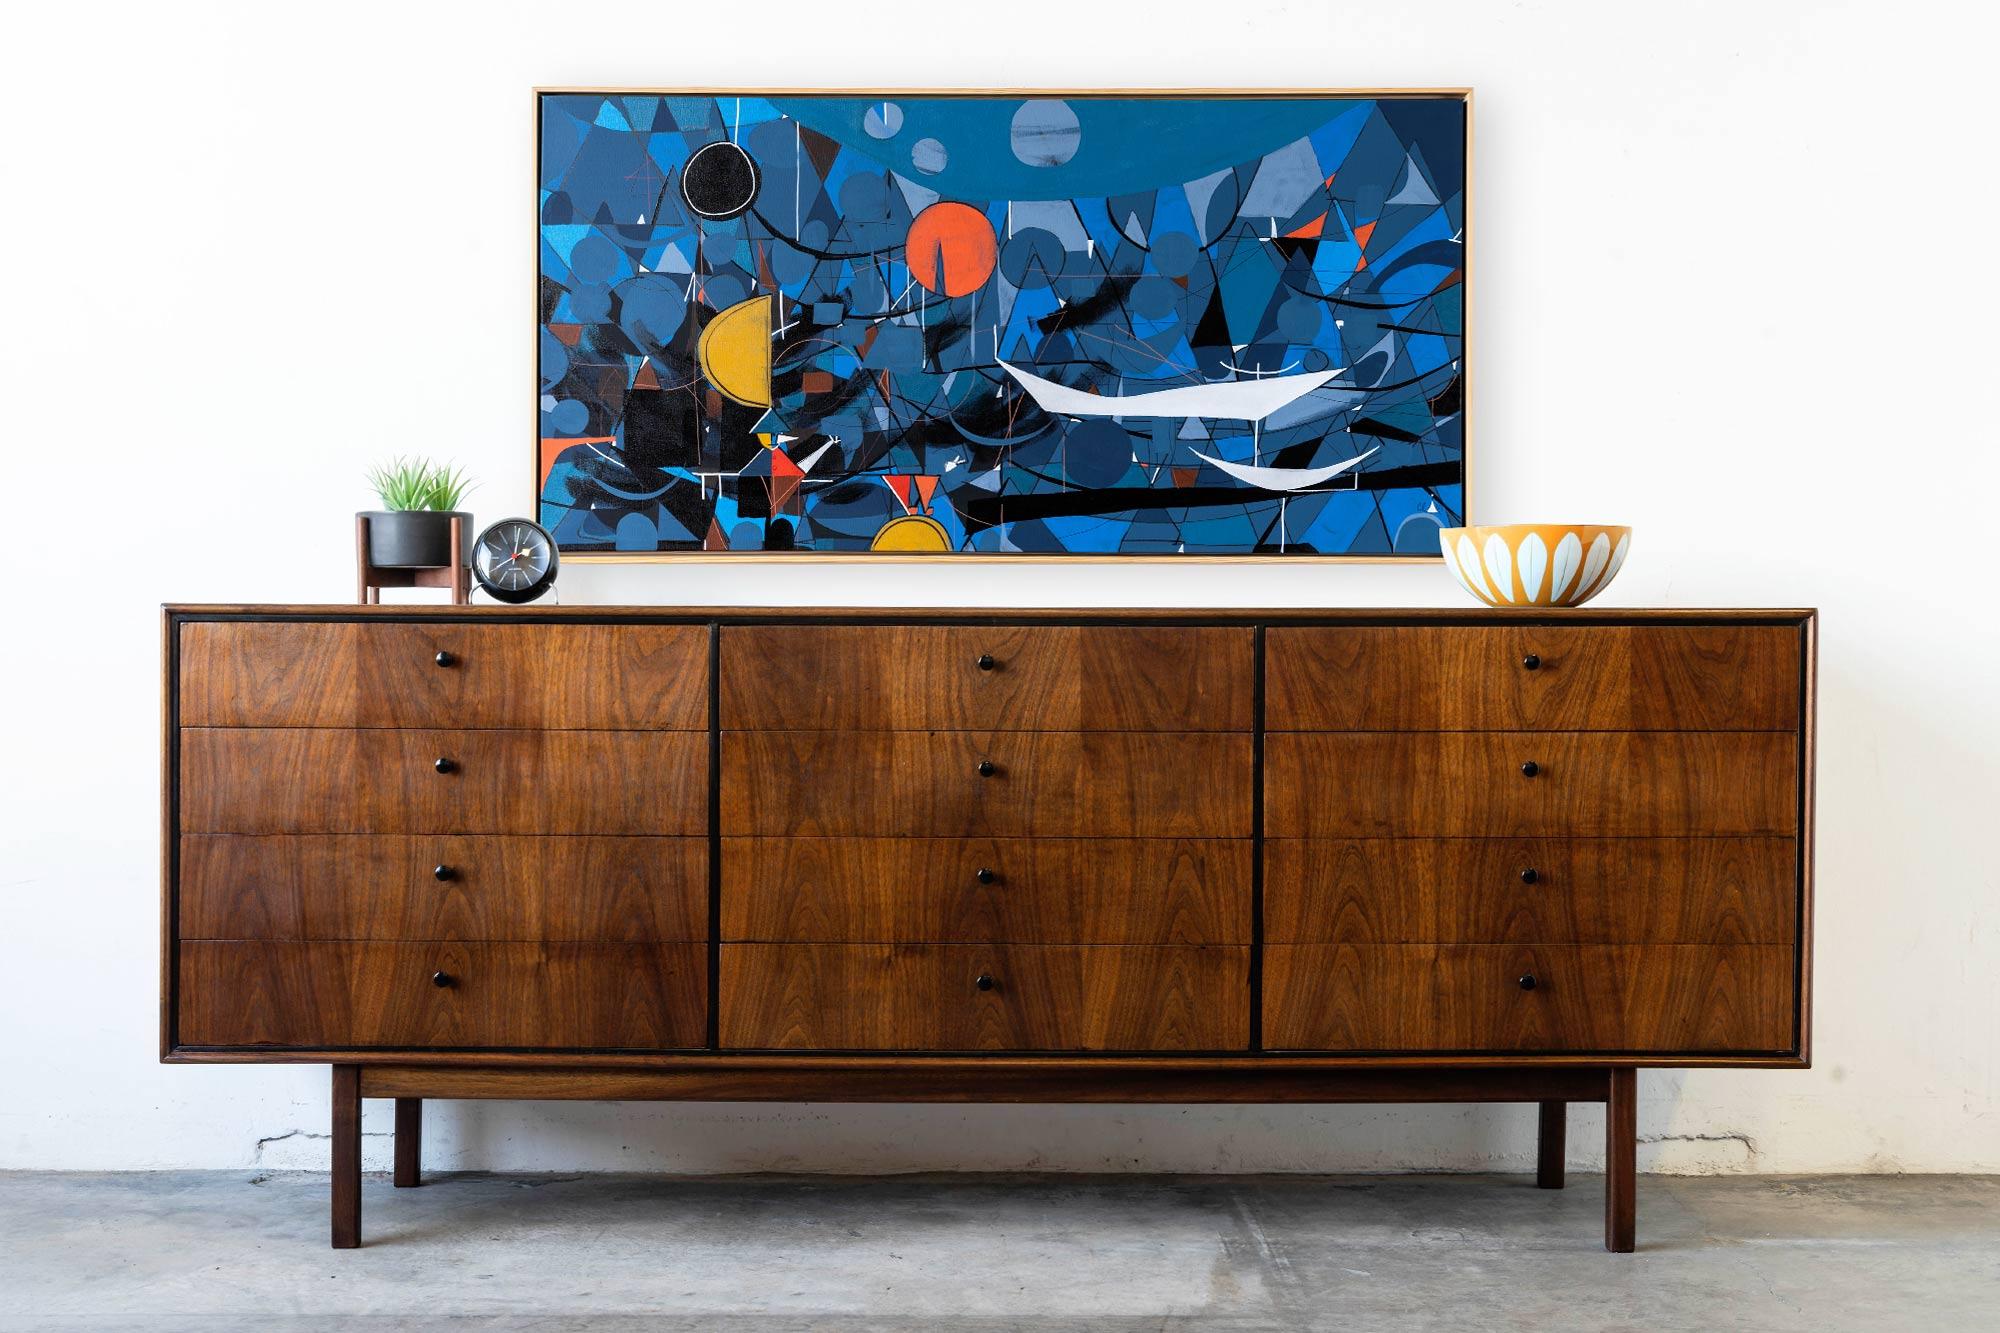 Walnut dresser designed by Jack Cartwright for Founders. A beautiful and substantial 12 drawer dresser featuring lovely grain patterns. Thin edge style reminiscent of Herman Miller designs of the time. Minor marks to body of dresser (see pictures